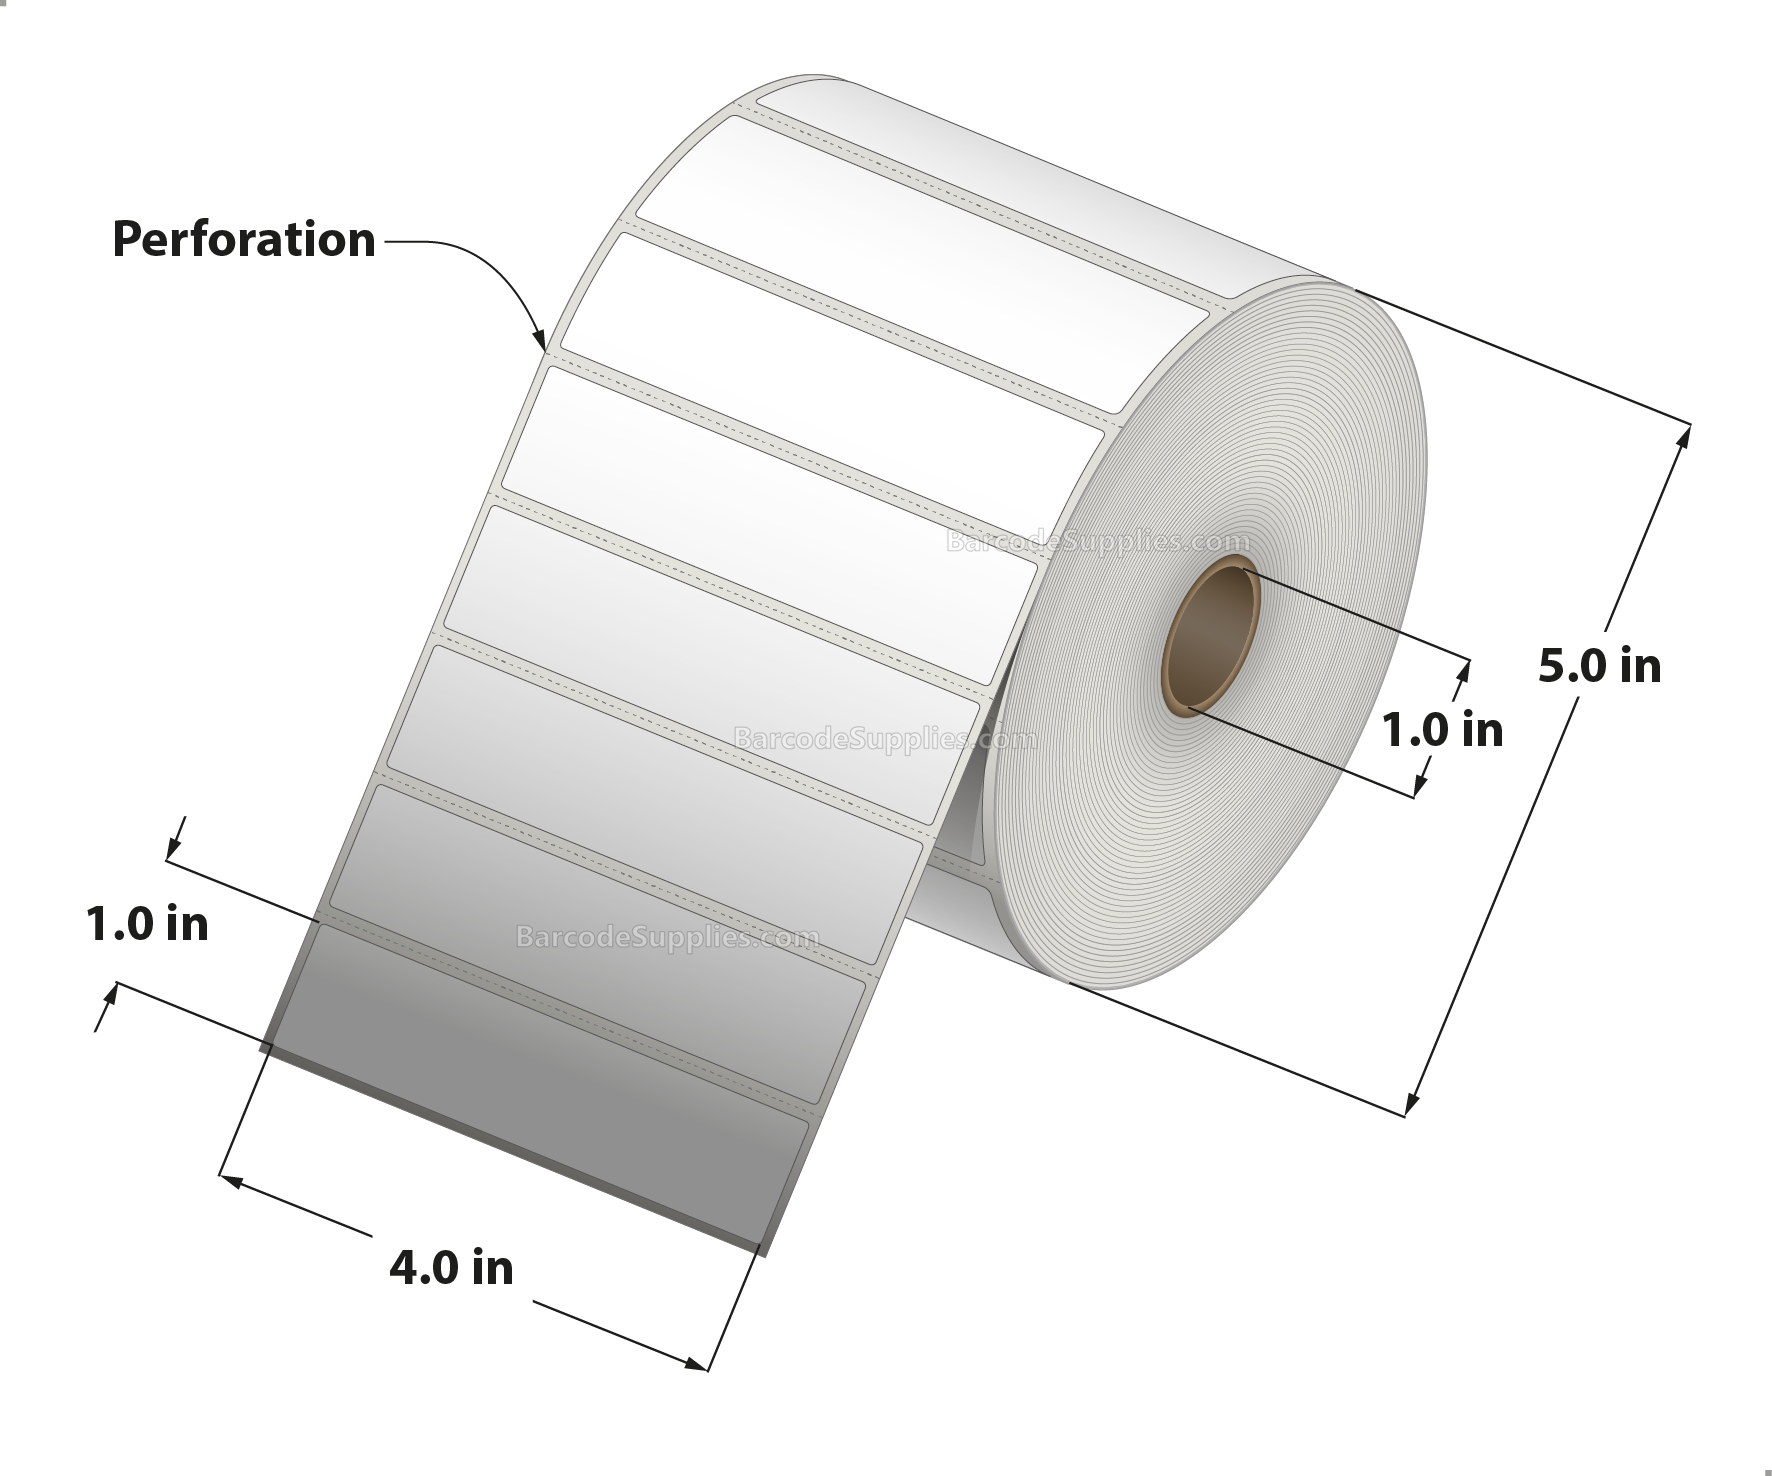 4 x 1 Direct Thermal White Labels With Permanent Acrylic Adhesive - Perforated - 2300 Labels Per Roll - Carton Of 4 Rolls - 9200 Labels Total - MPN: DT41-15PDT